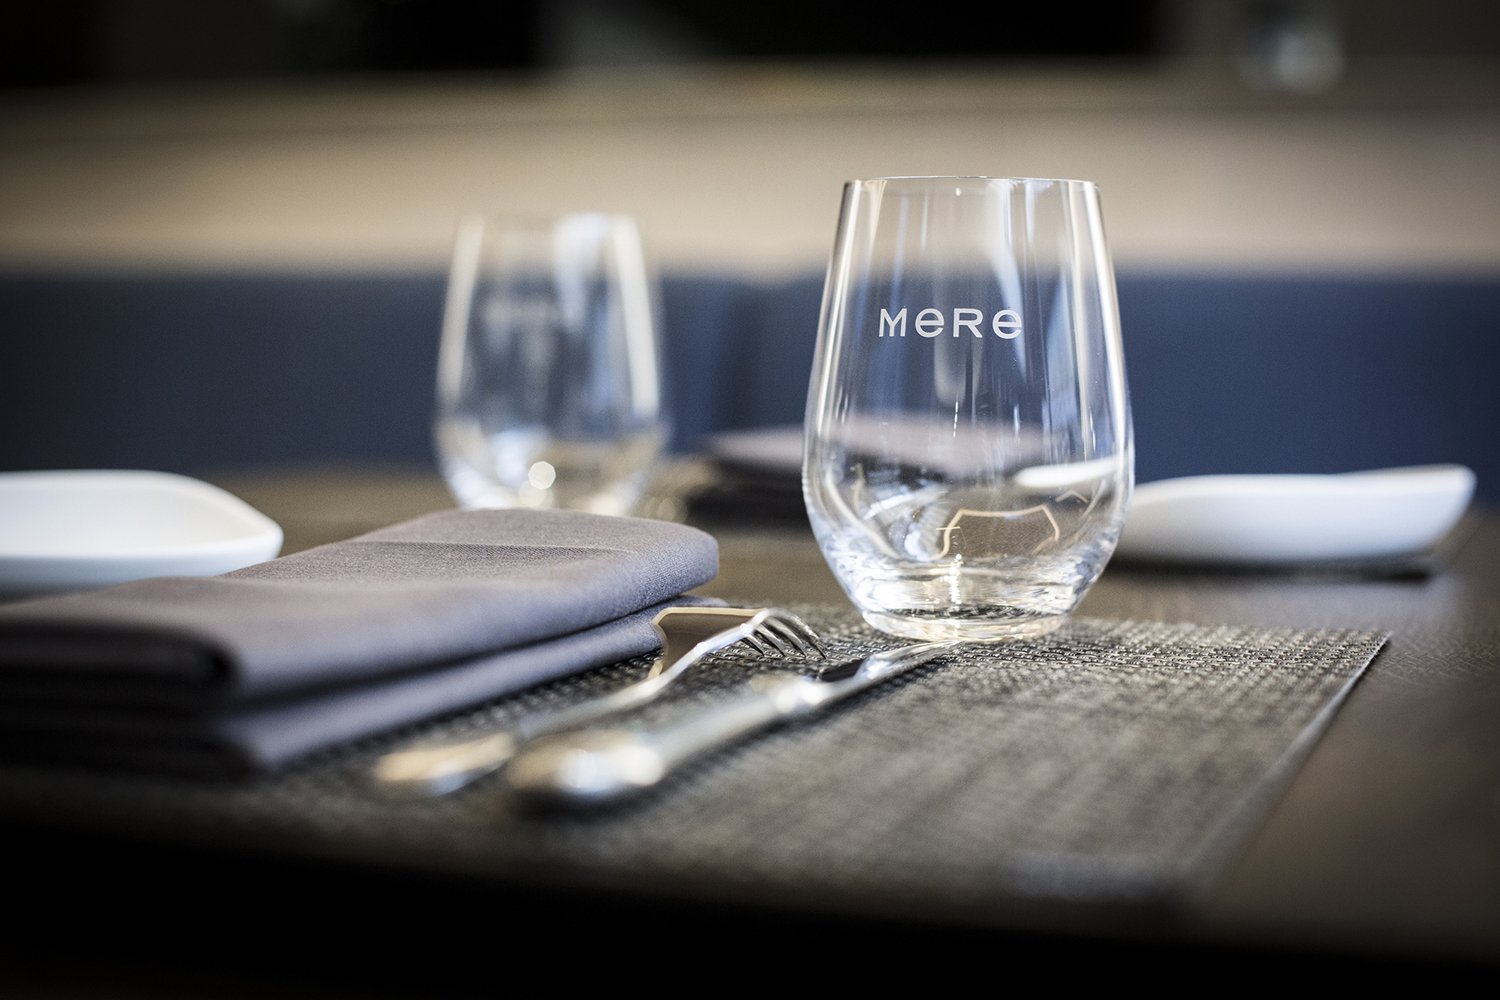 Logotype and branded glassware designed by Bibliothèque for Monica Galetti's new London restaurant Mere